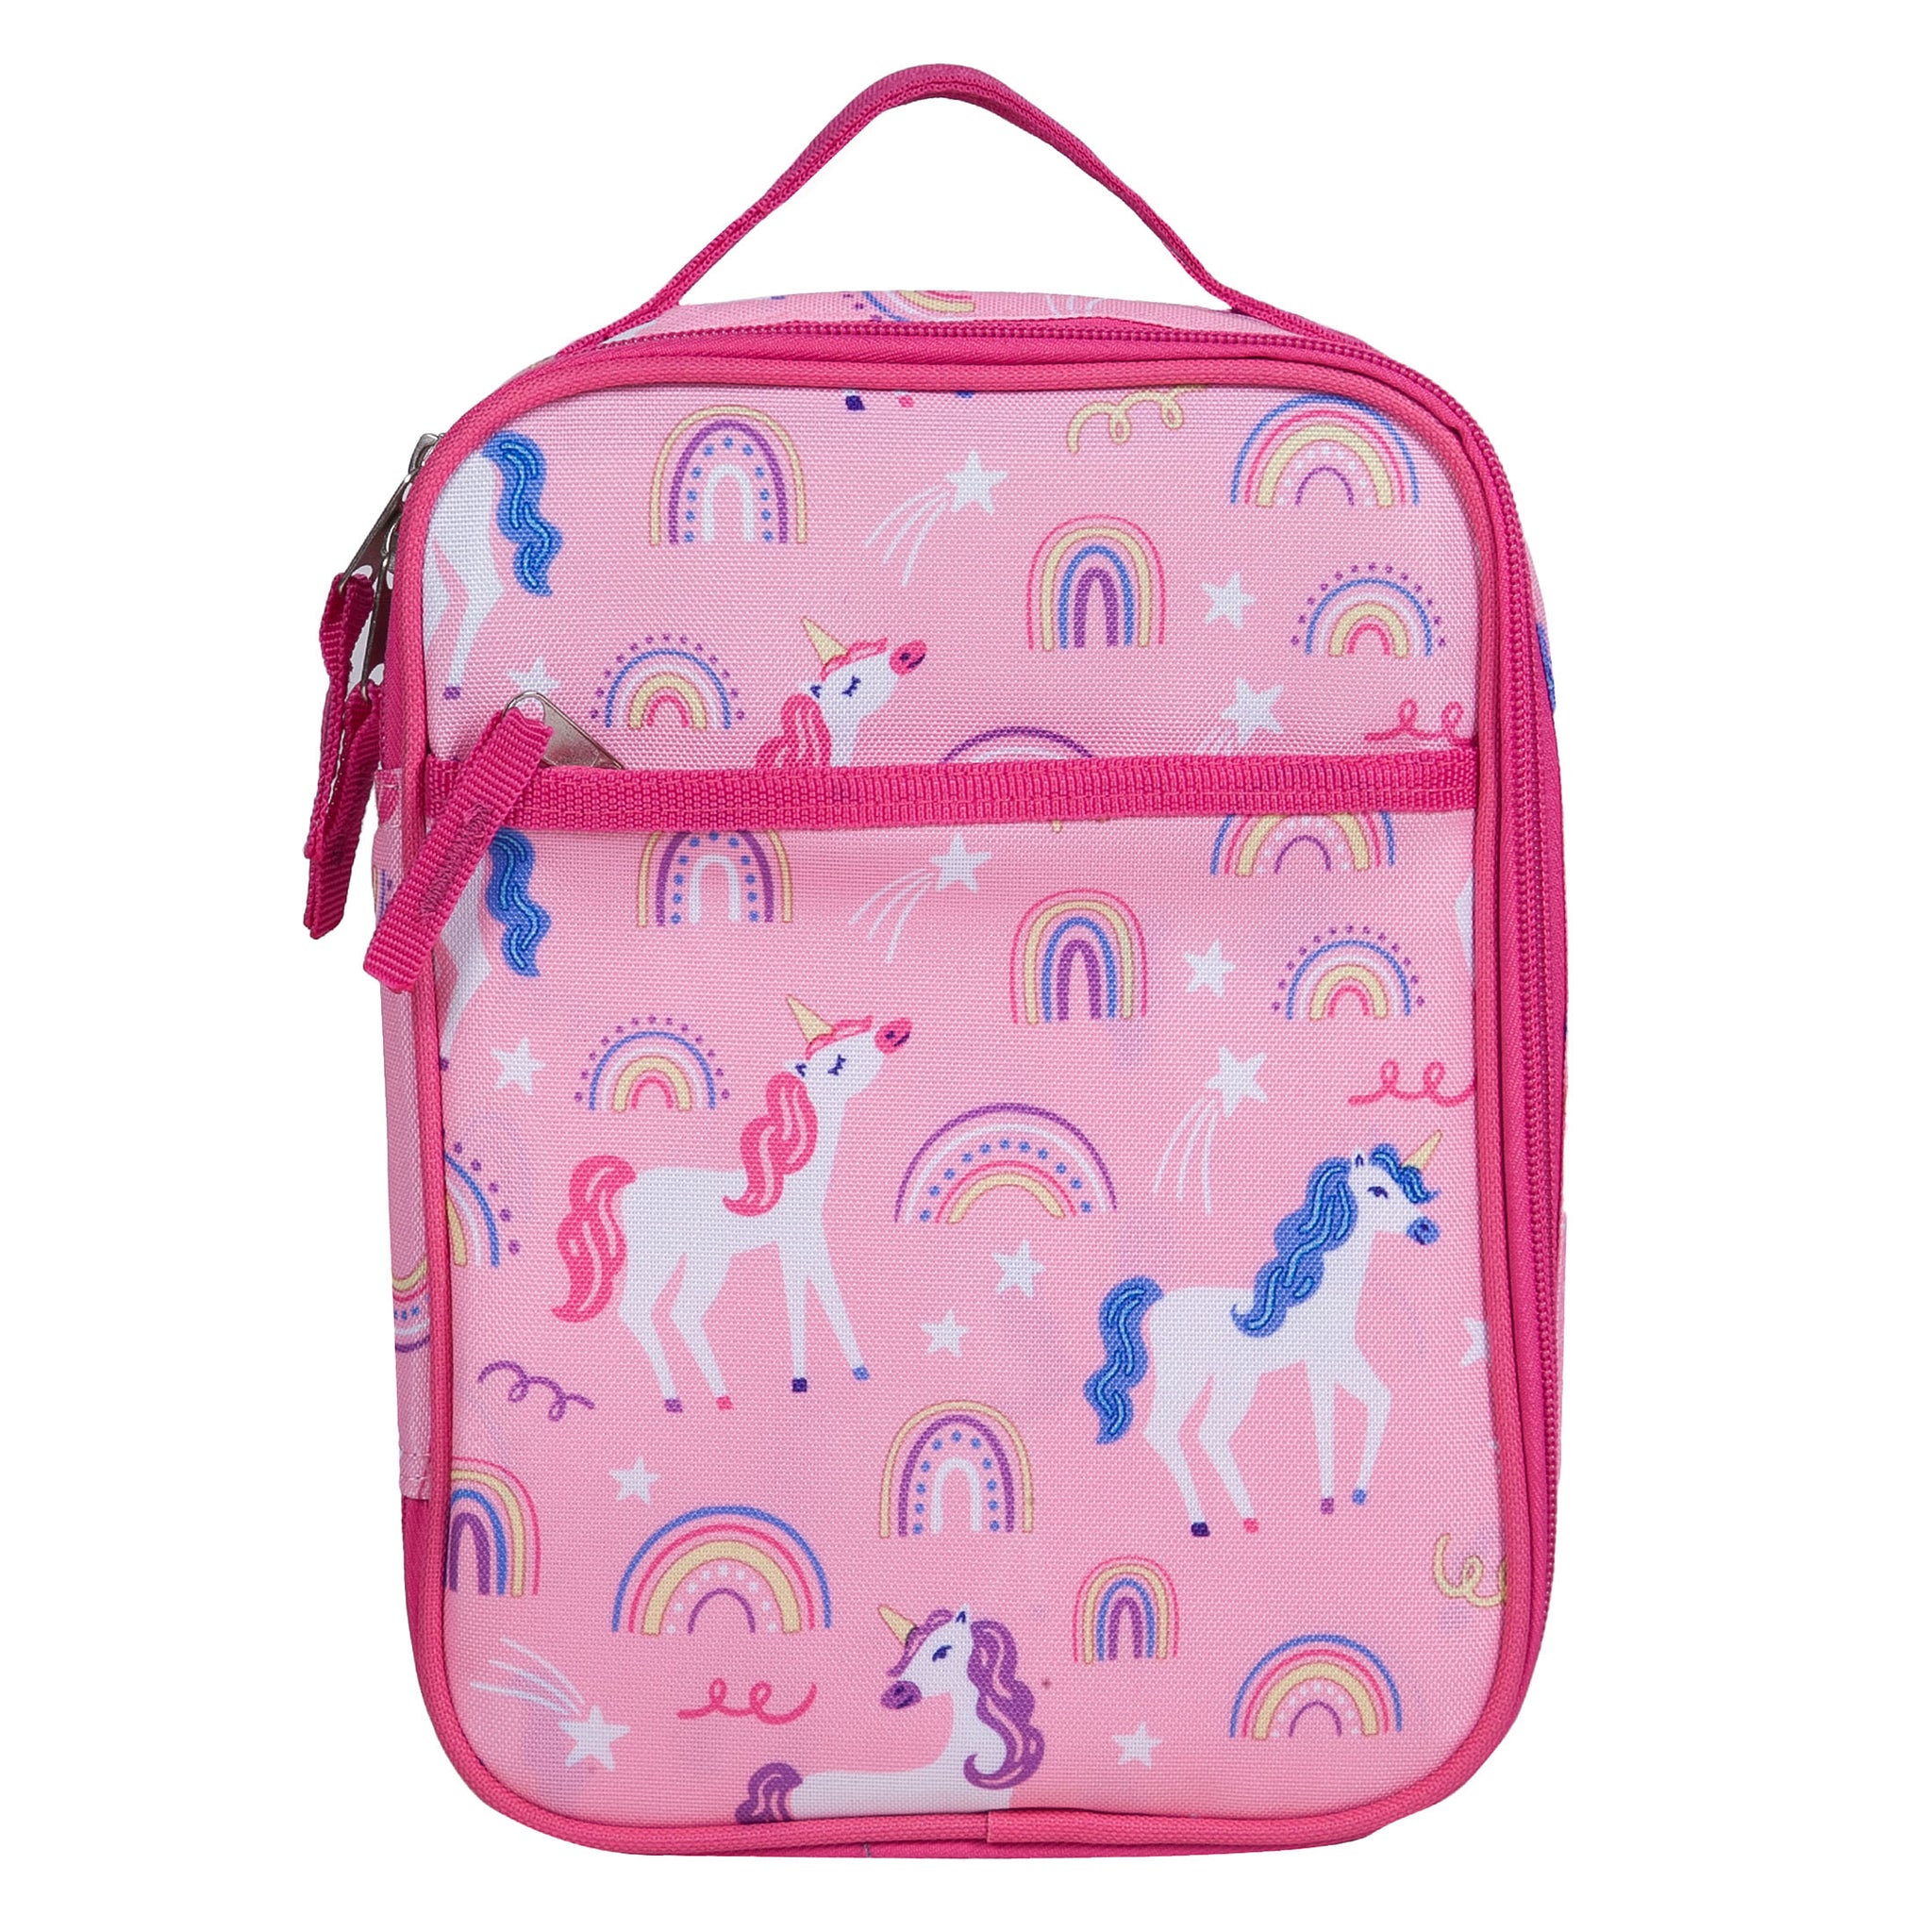 Rainbow Unicorn Personalized Pink Lunch Bag